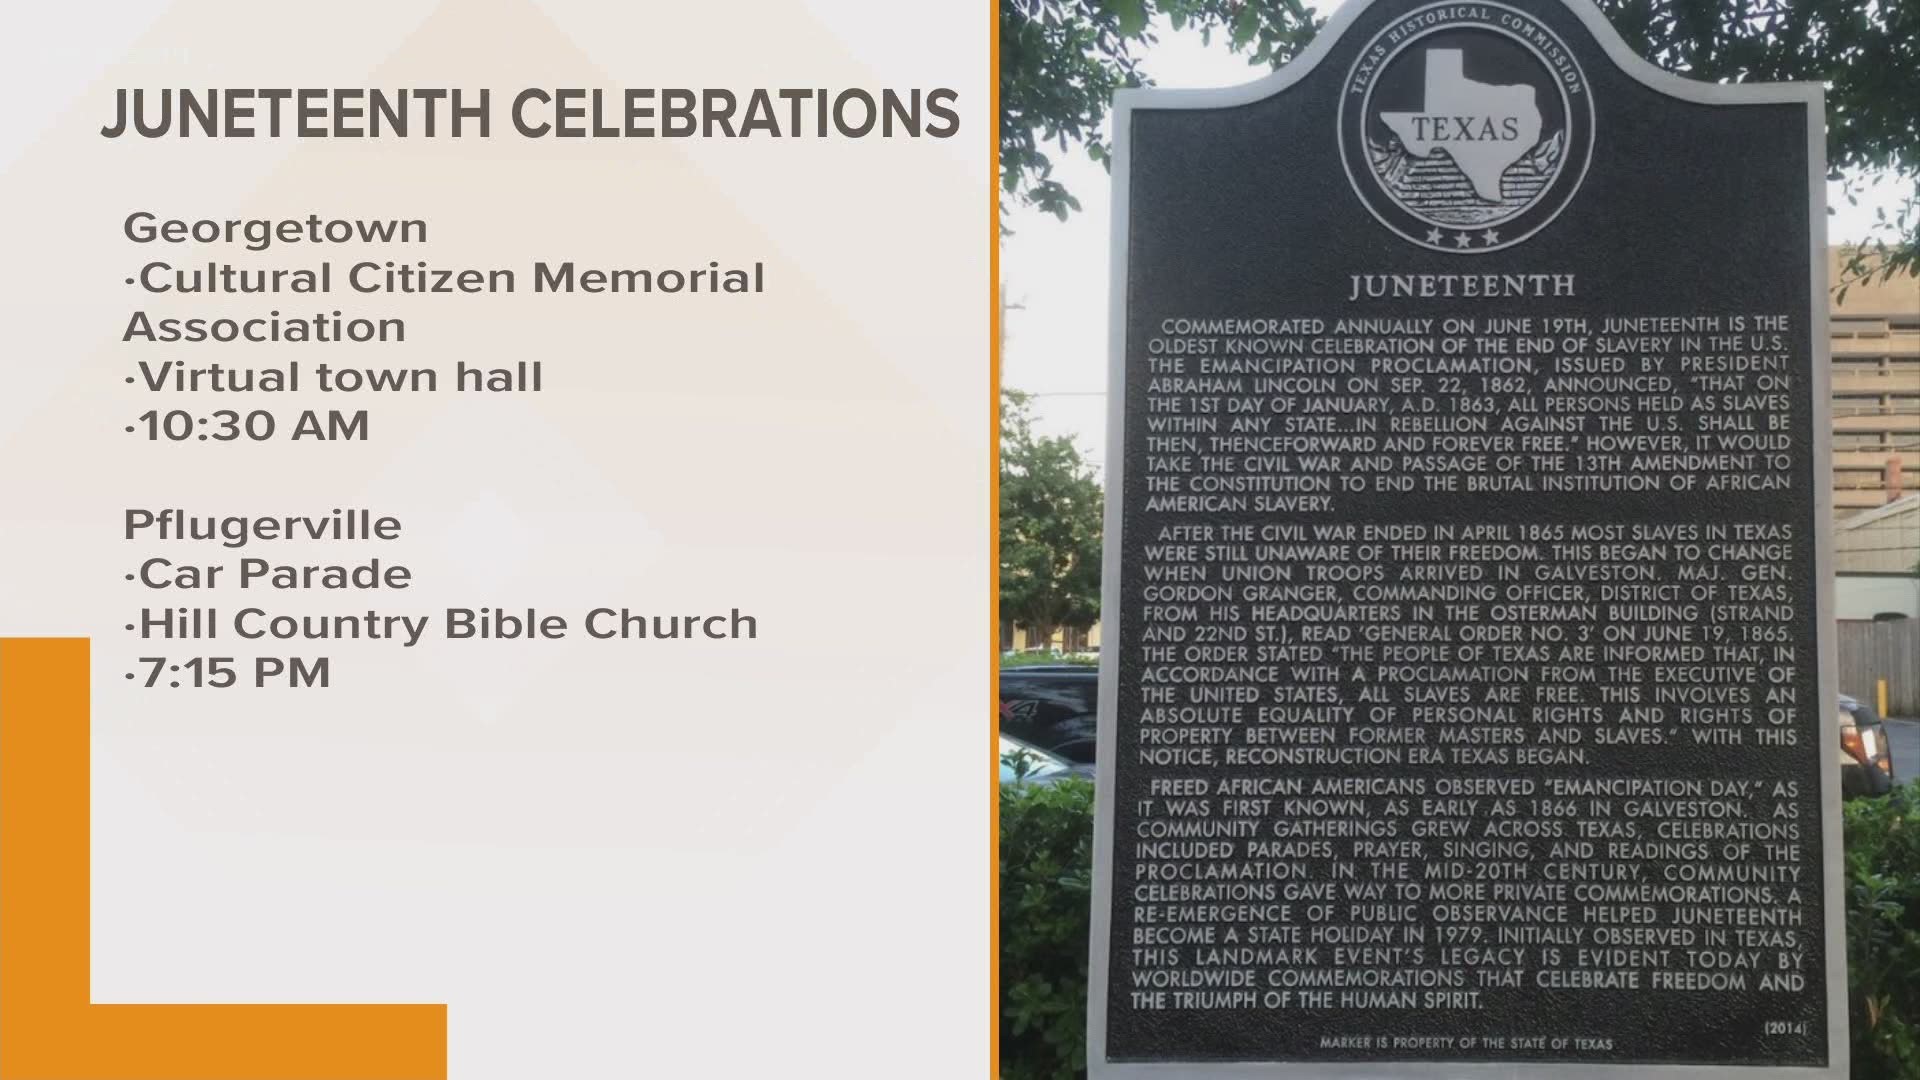 Juneteenth was observed on Friday, June 19, but the Central Texas celebrations are continuing on Saturday.